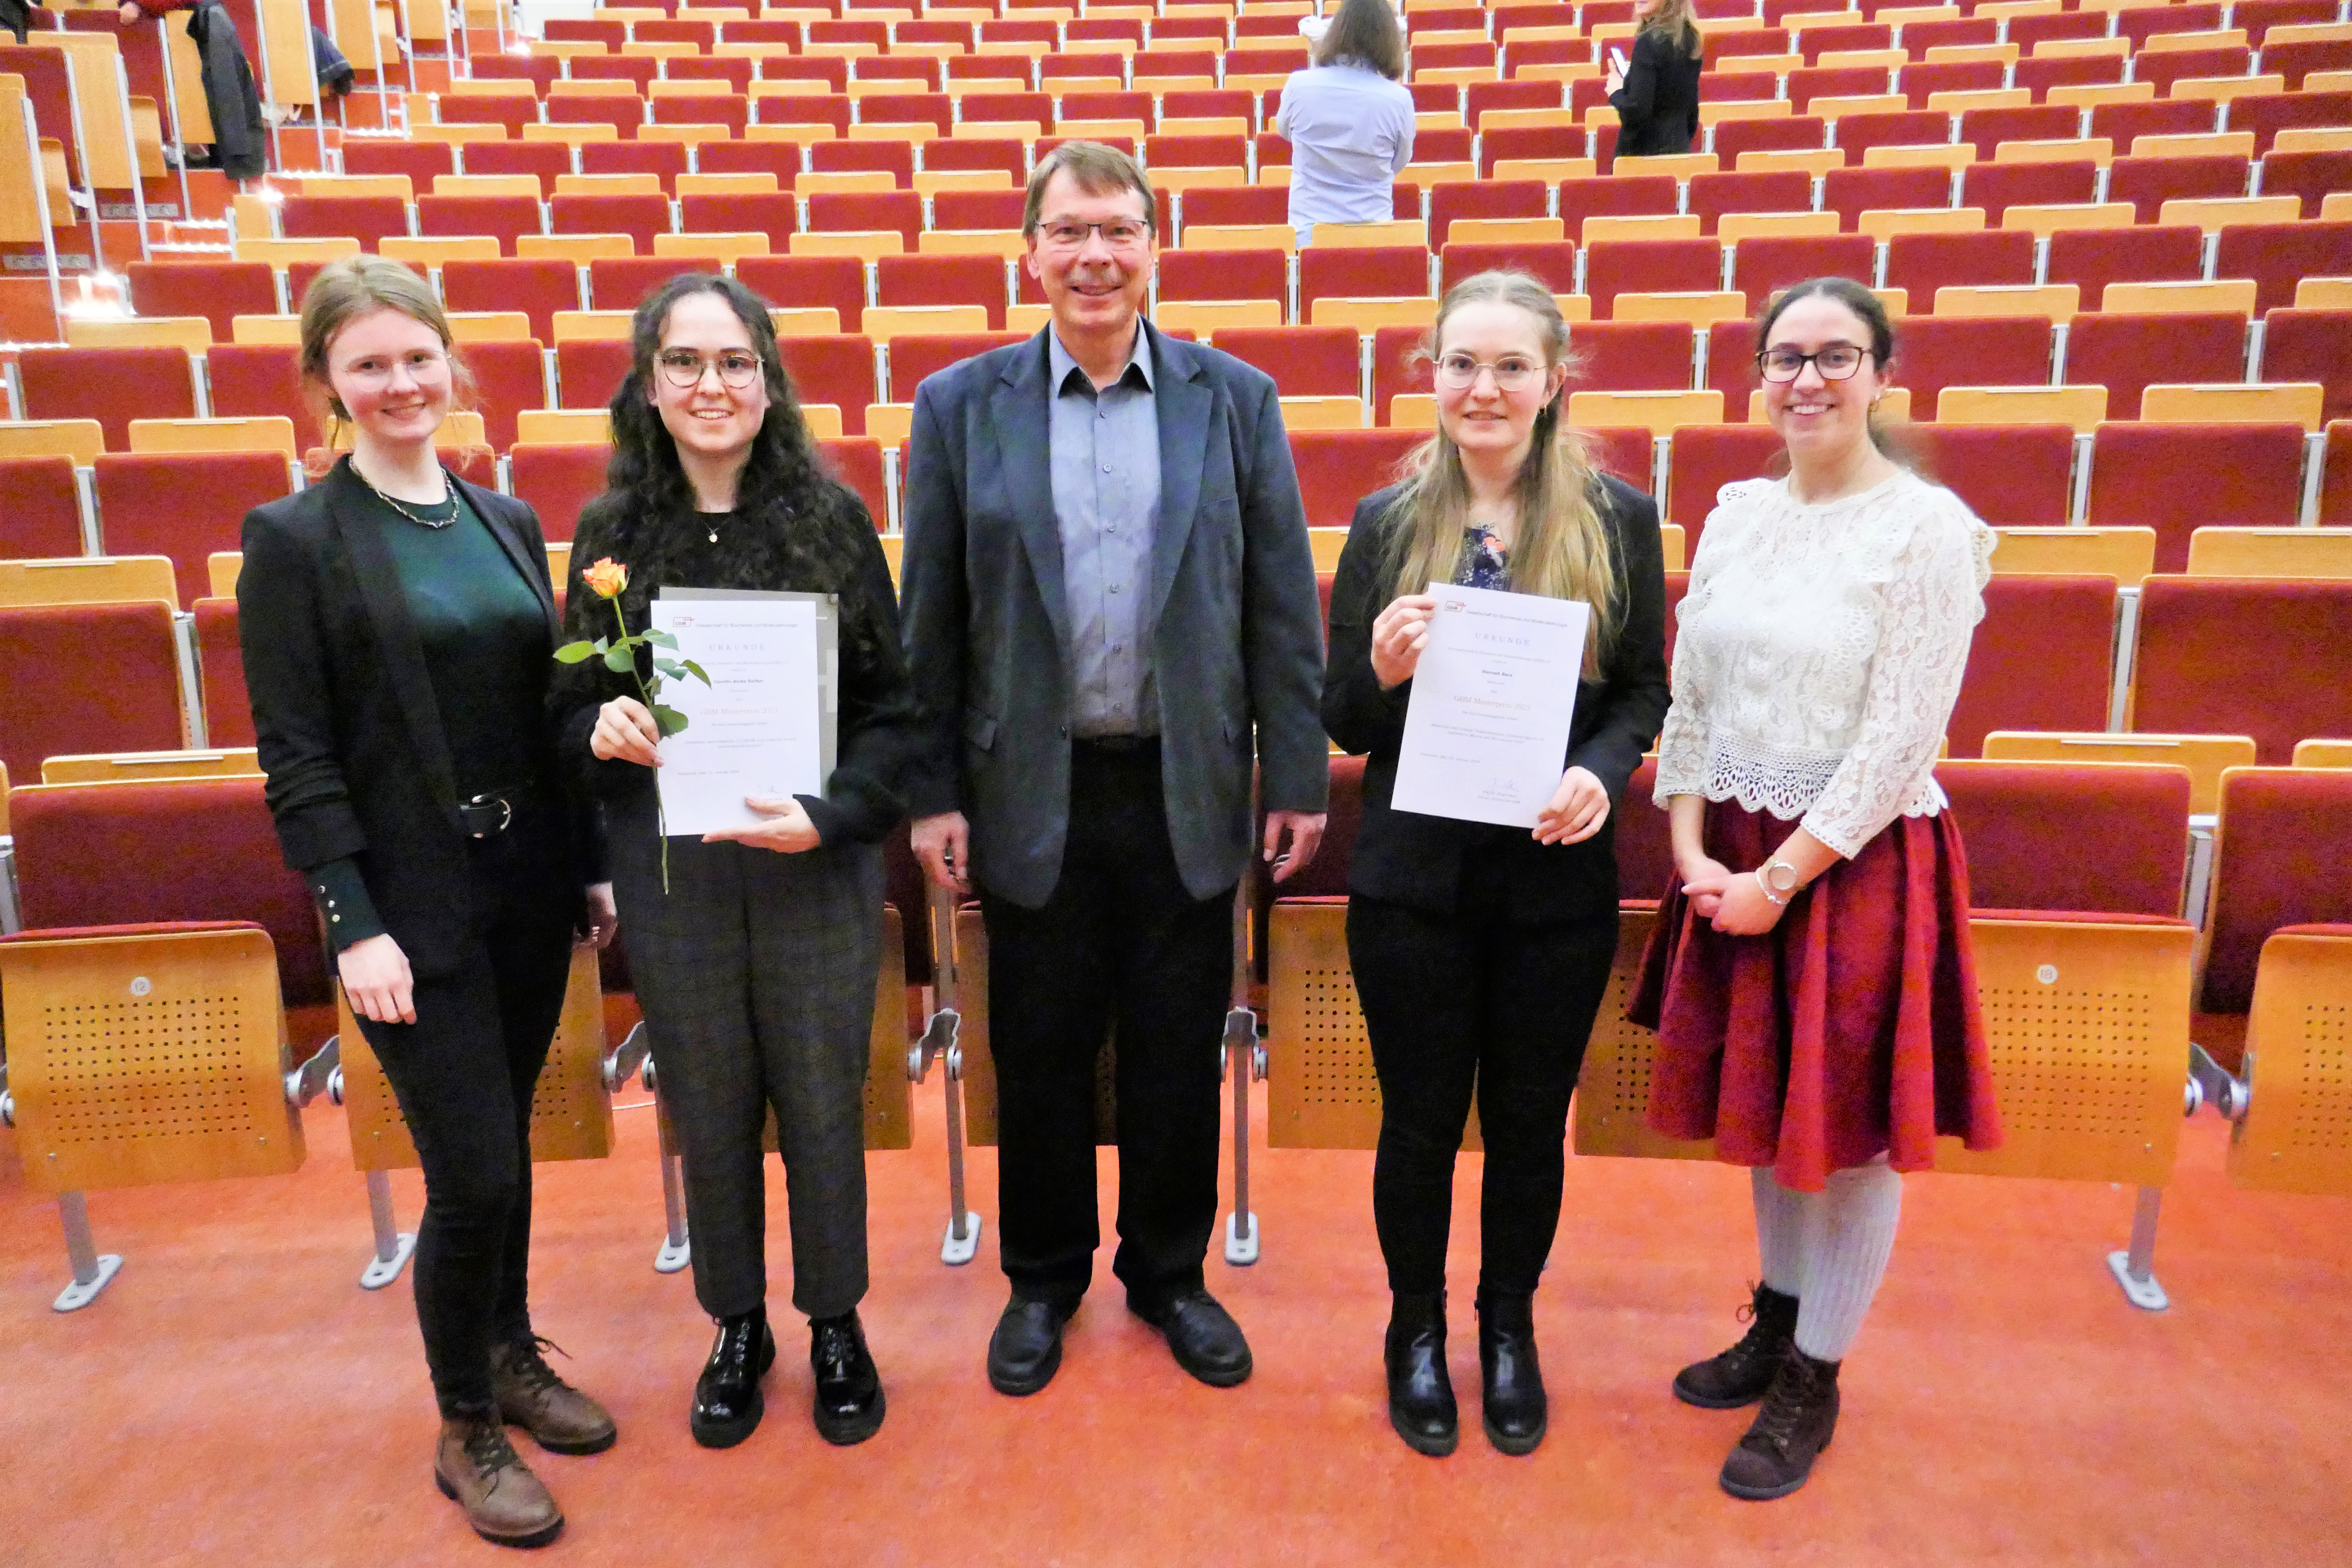 Prof. Dr Jürgen Alves (centre) presented the GBM prize for the best Master's thesis in biochemistry to Hannah Barz (2nd from right) and for the best Master's thesis in biomedicine to Carolin Aicha Rother. Congratulations to Lydia Bosse (left) and Khadija Aichane from the Junior GBM, Hanover branch. 